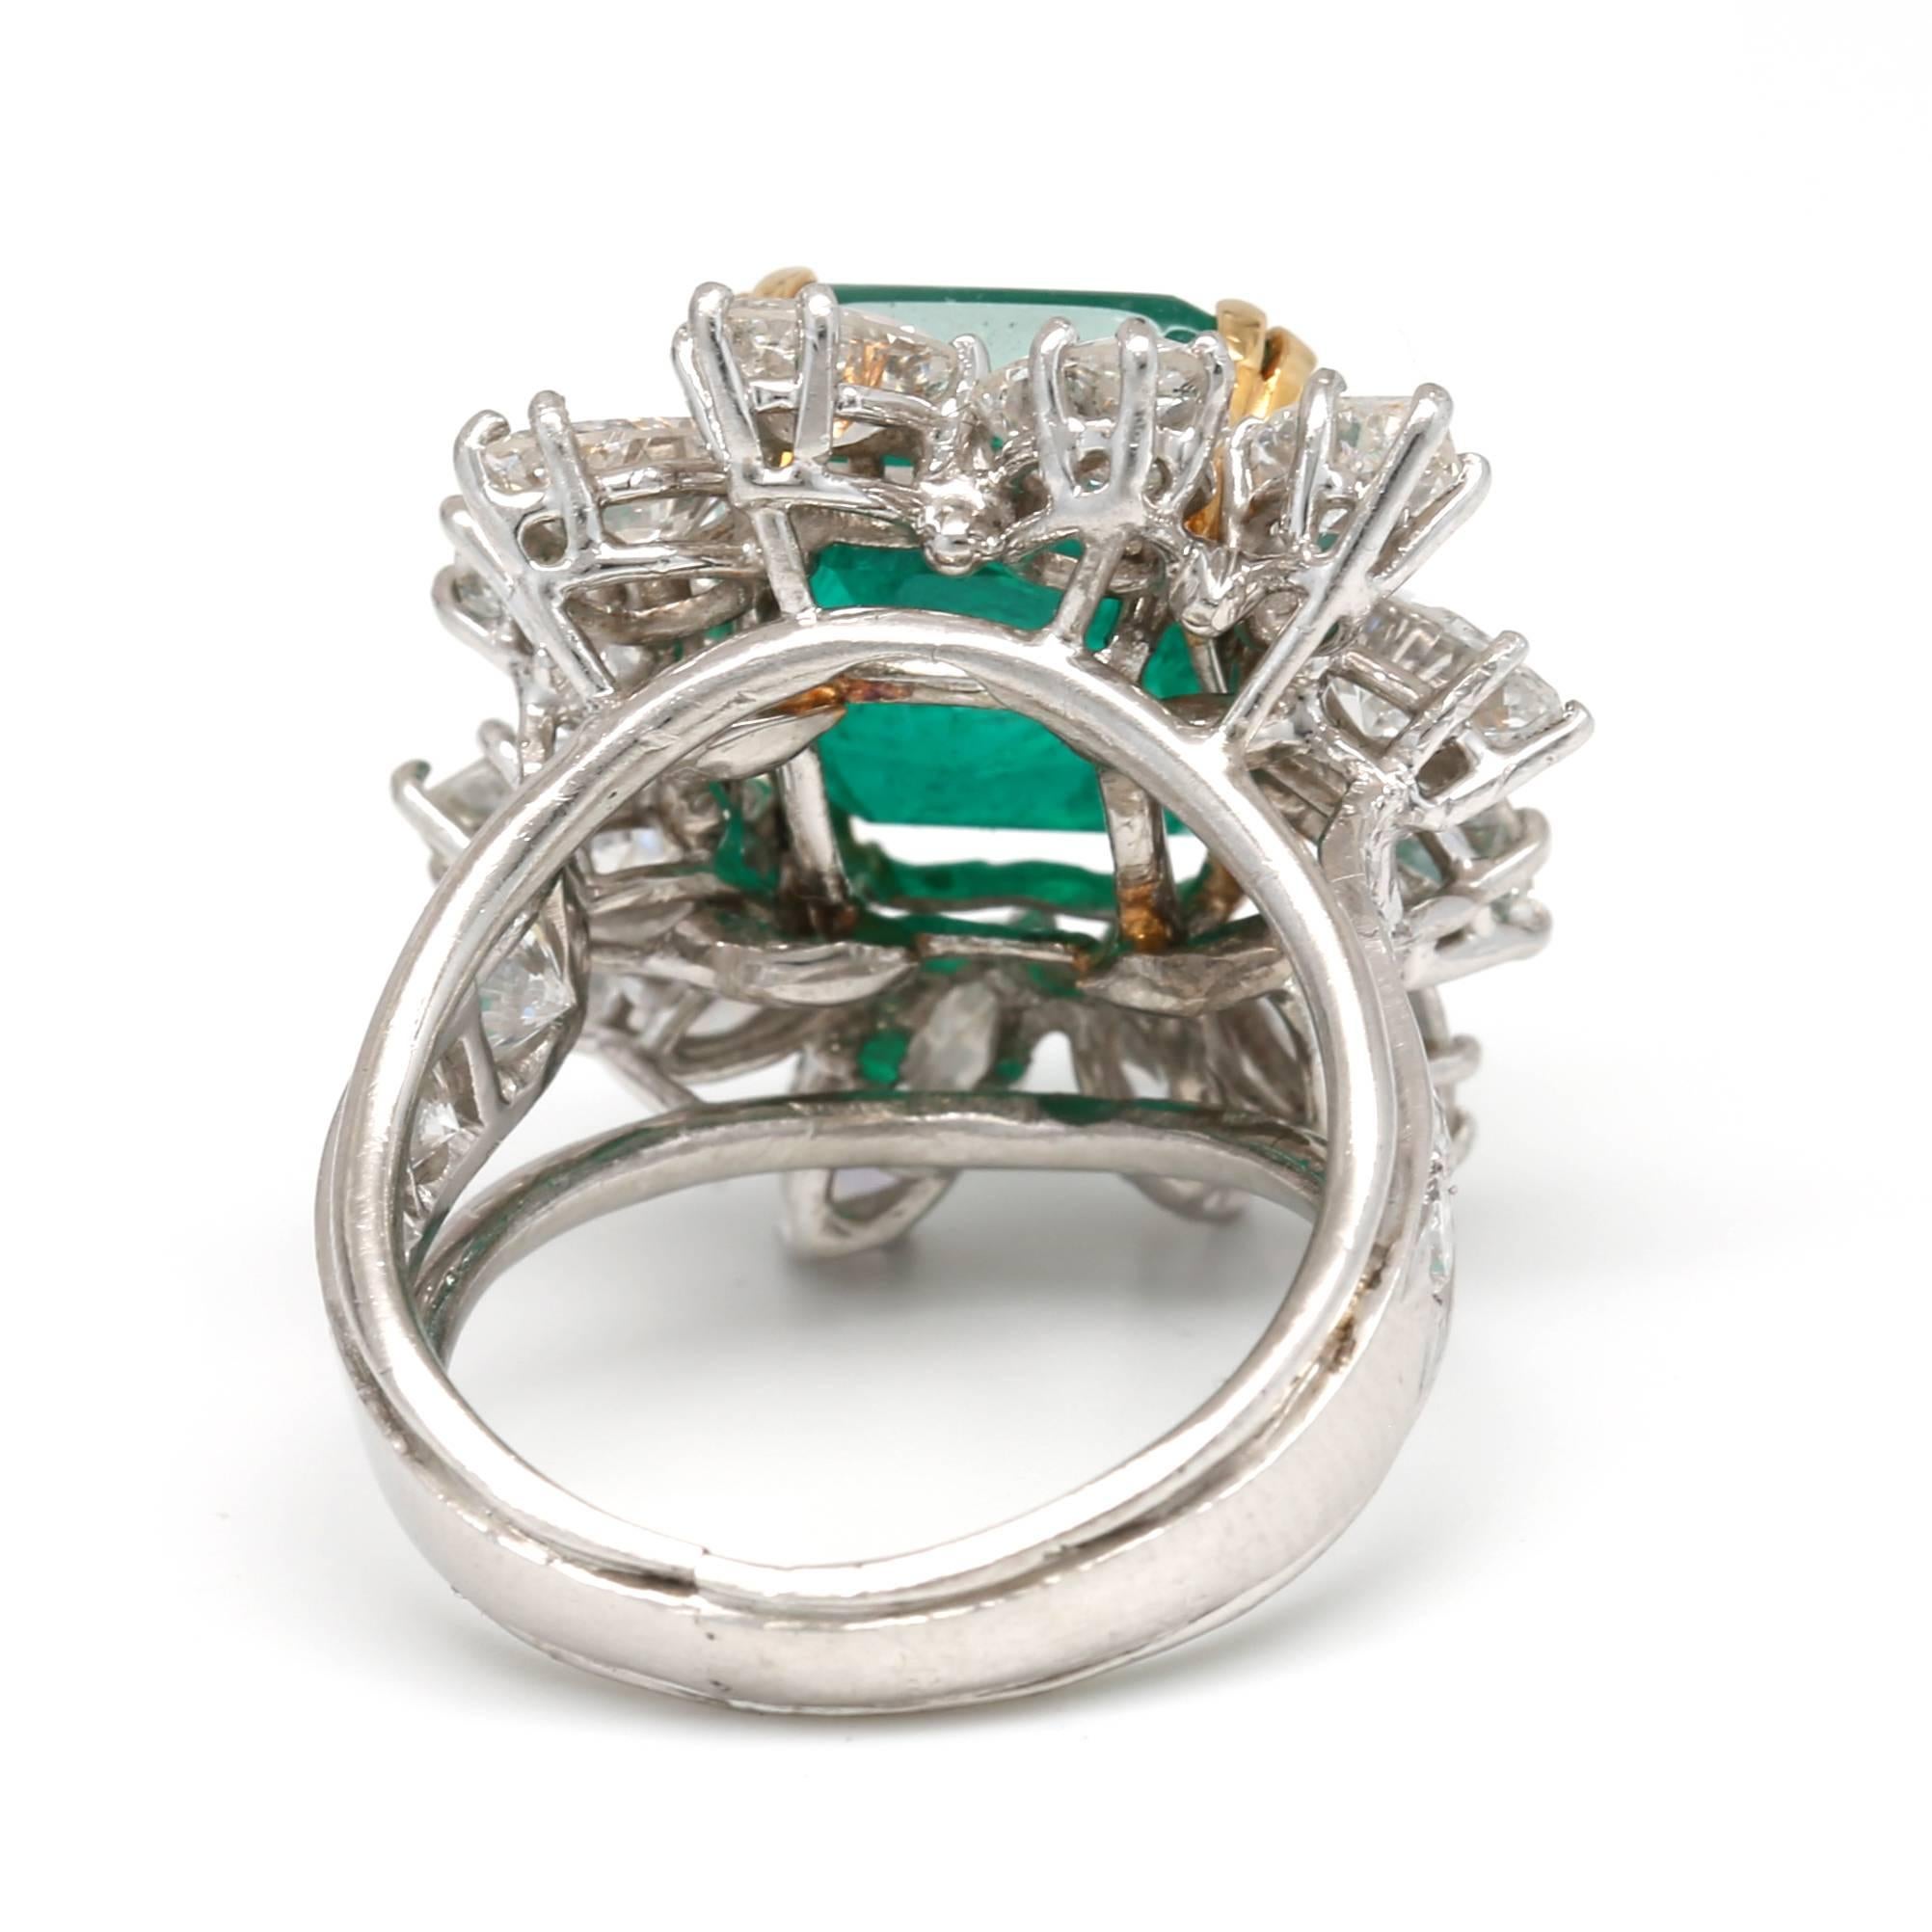 This Gorgeous 9.72 Ct Emerald Ring is set in Platinum with 18 Diamonds Weighing 5.00 Cts D-E Color VVS-VS Clarity.
Metal Weight 15.20 grams.